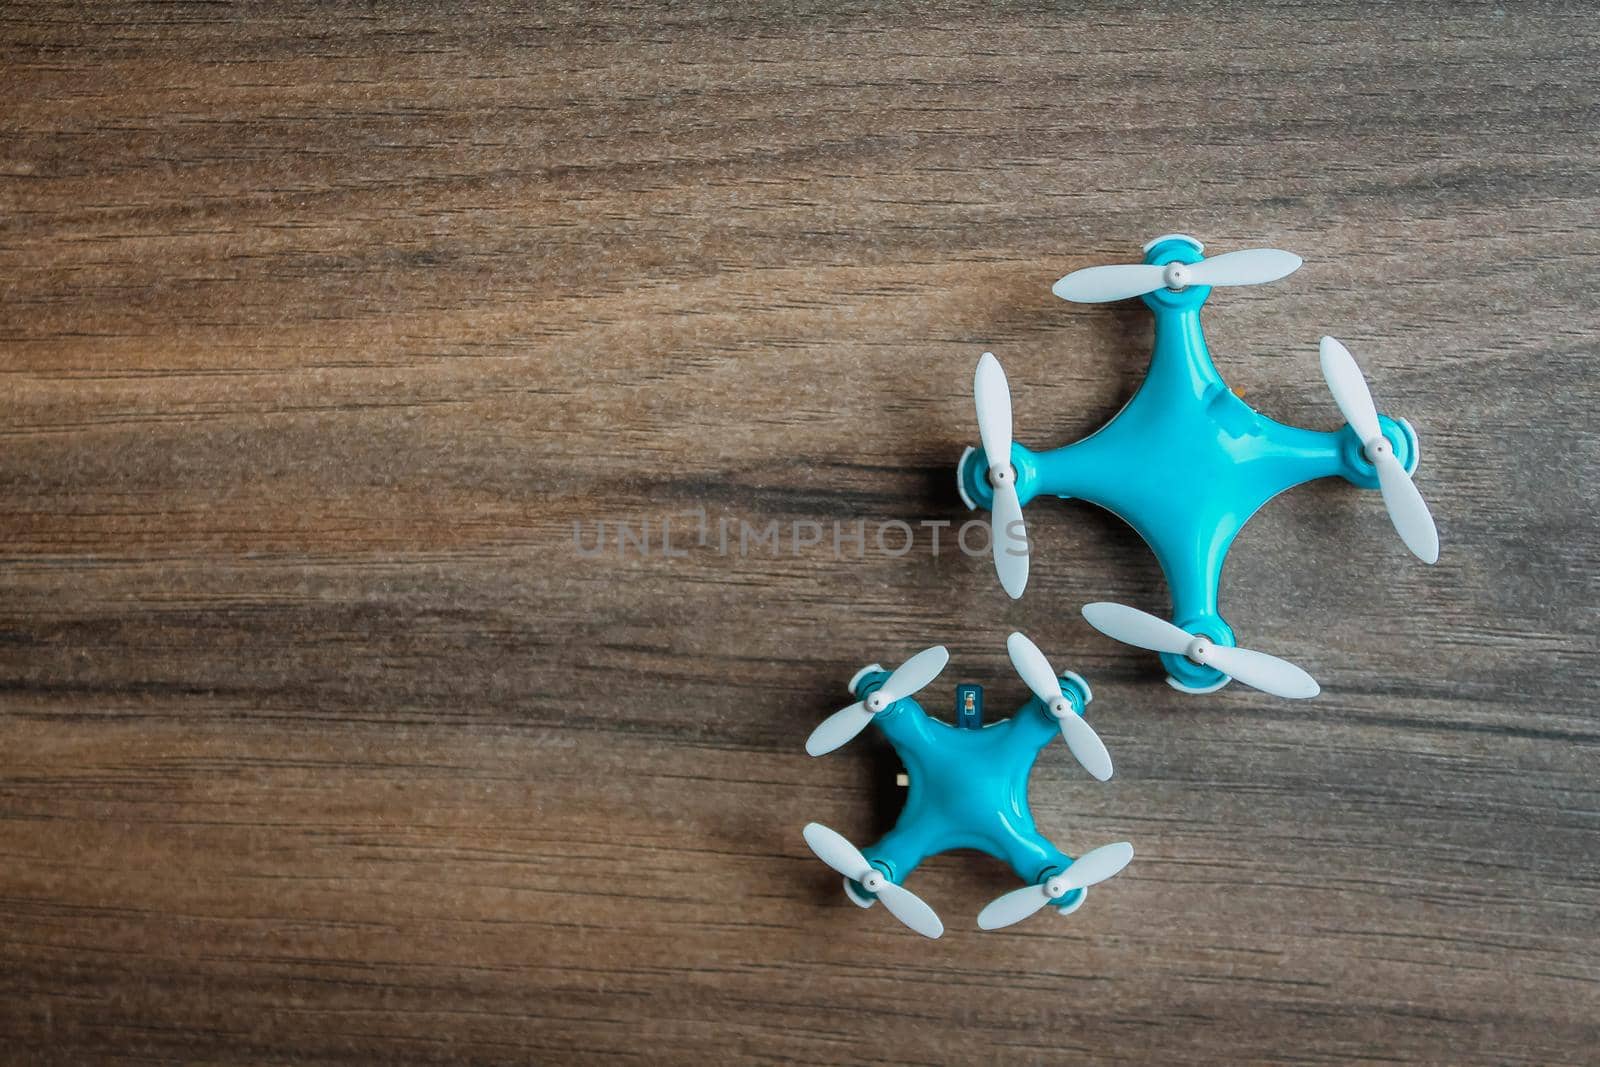 View of tiny drone on a wooden background. Small blue drone with white propellers. by JuliaDorian